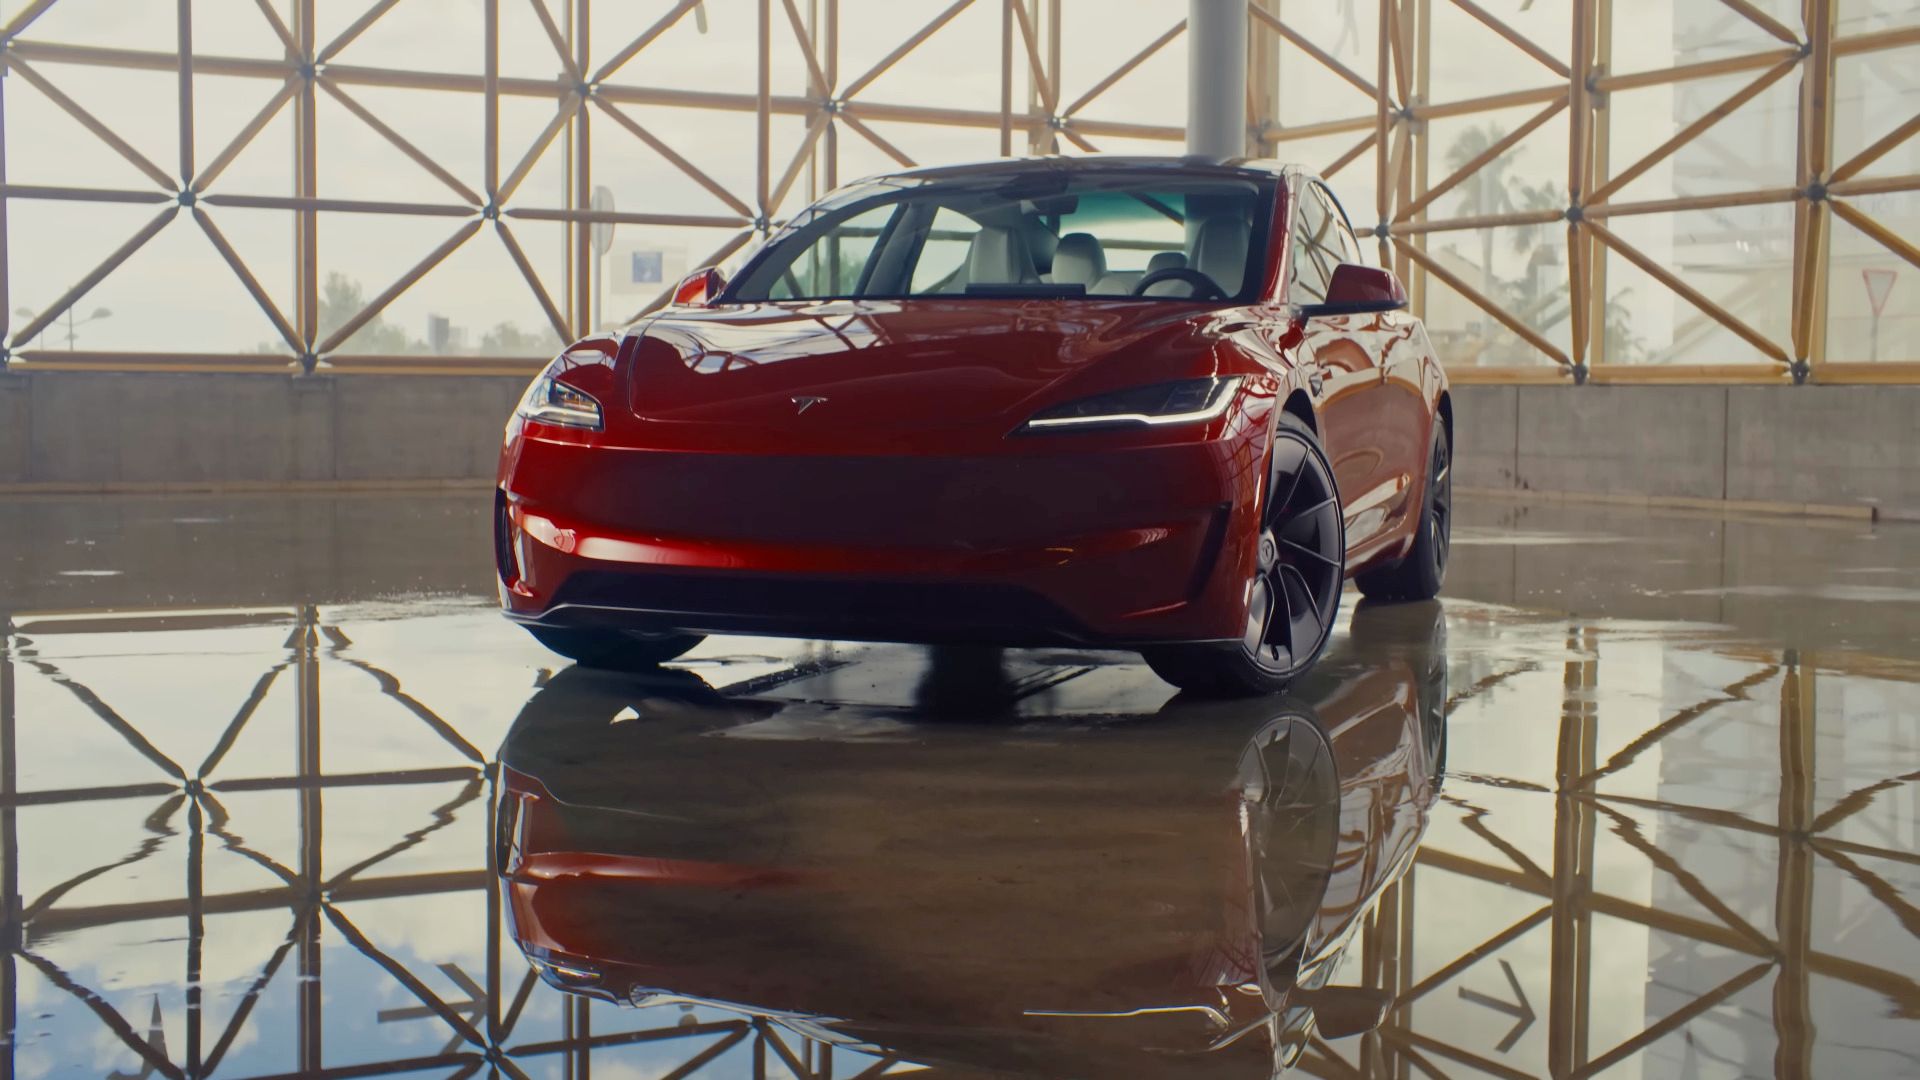 WATCH: Tesla Explains What Went Into Making The New Model 3 Performance So Good